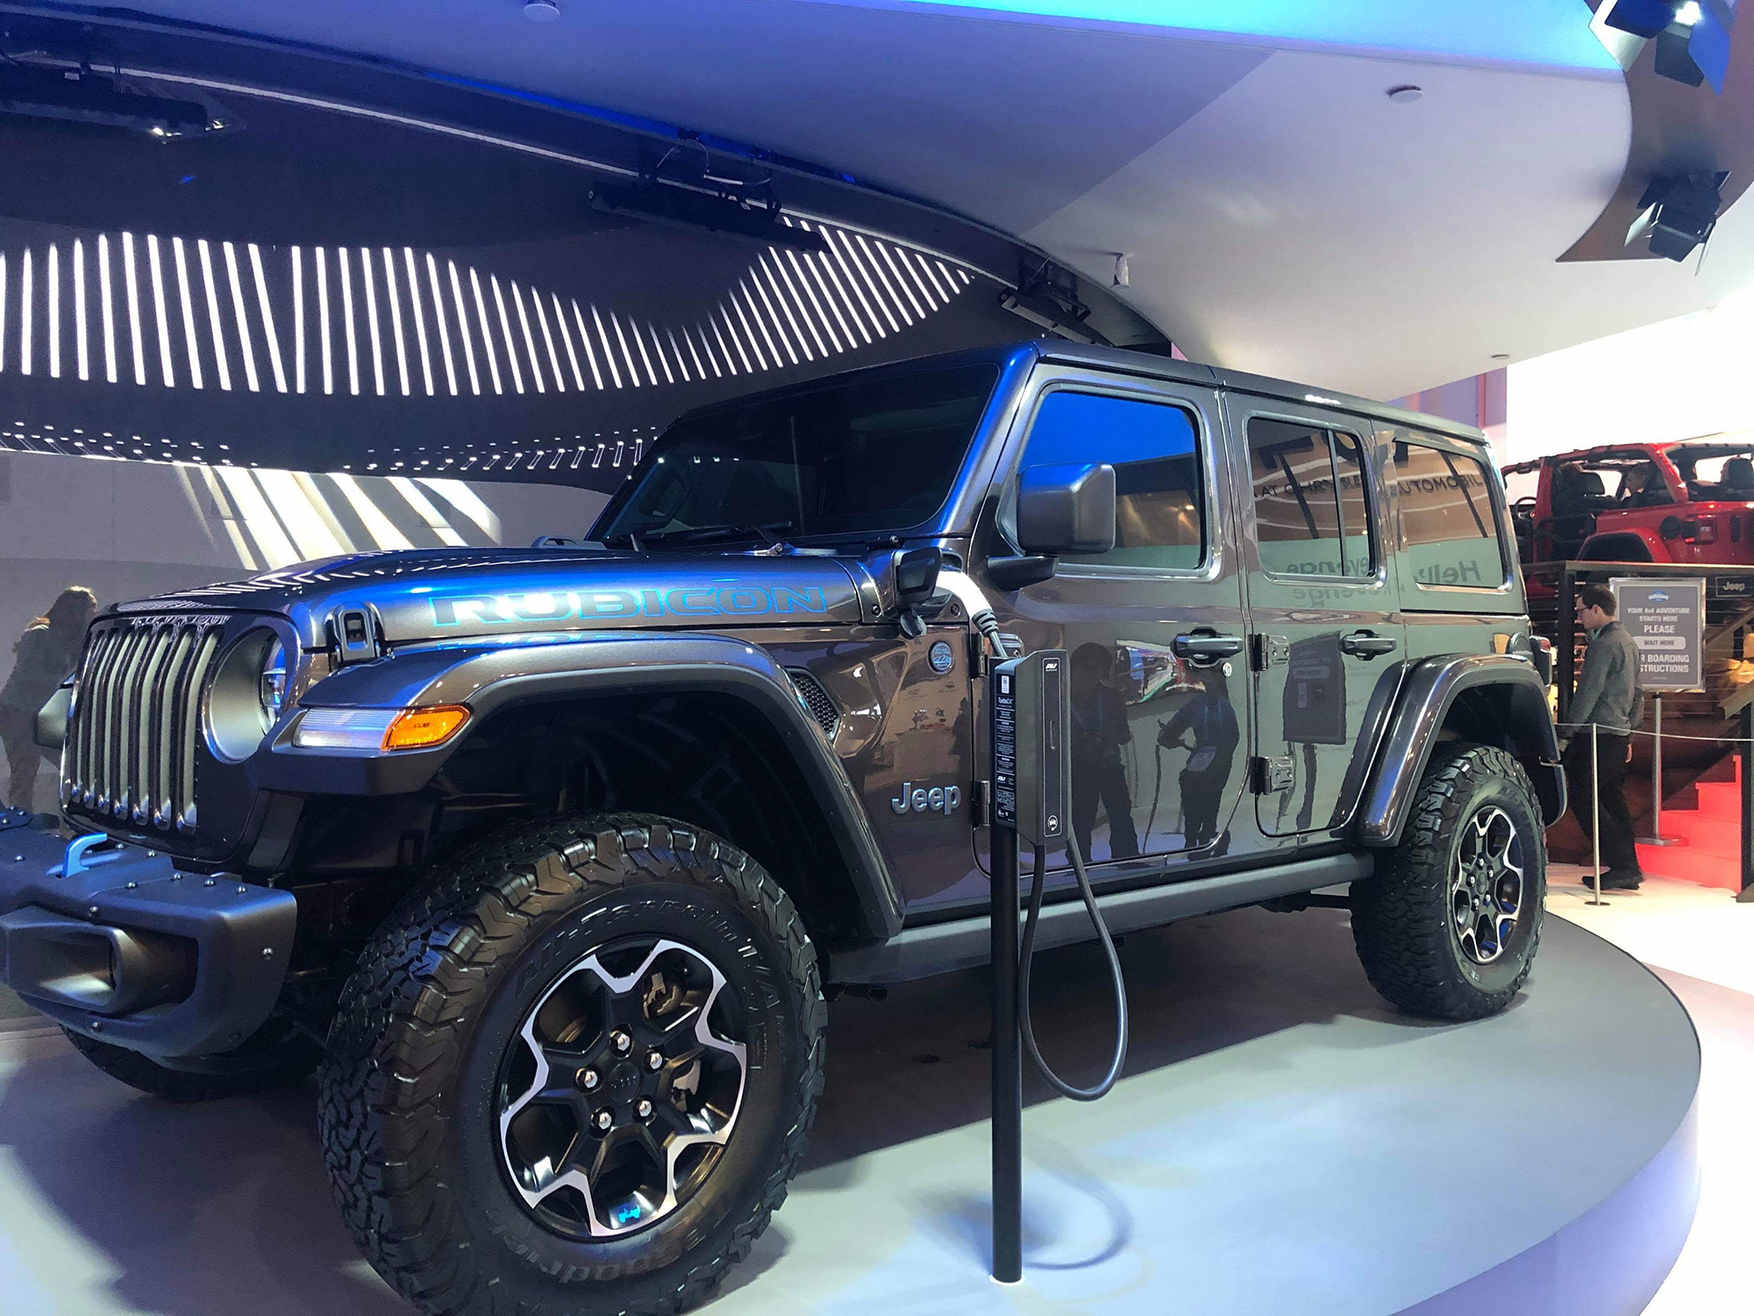 FCA Displays Electric Jeep Wrangler 4XE PlugIn Hybrid At CES 2020